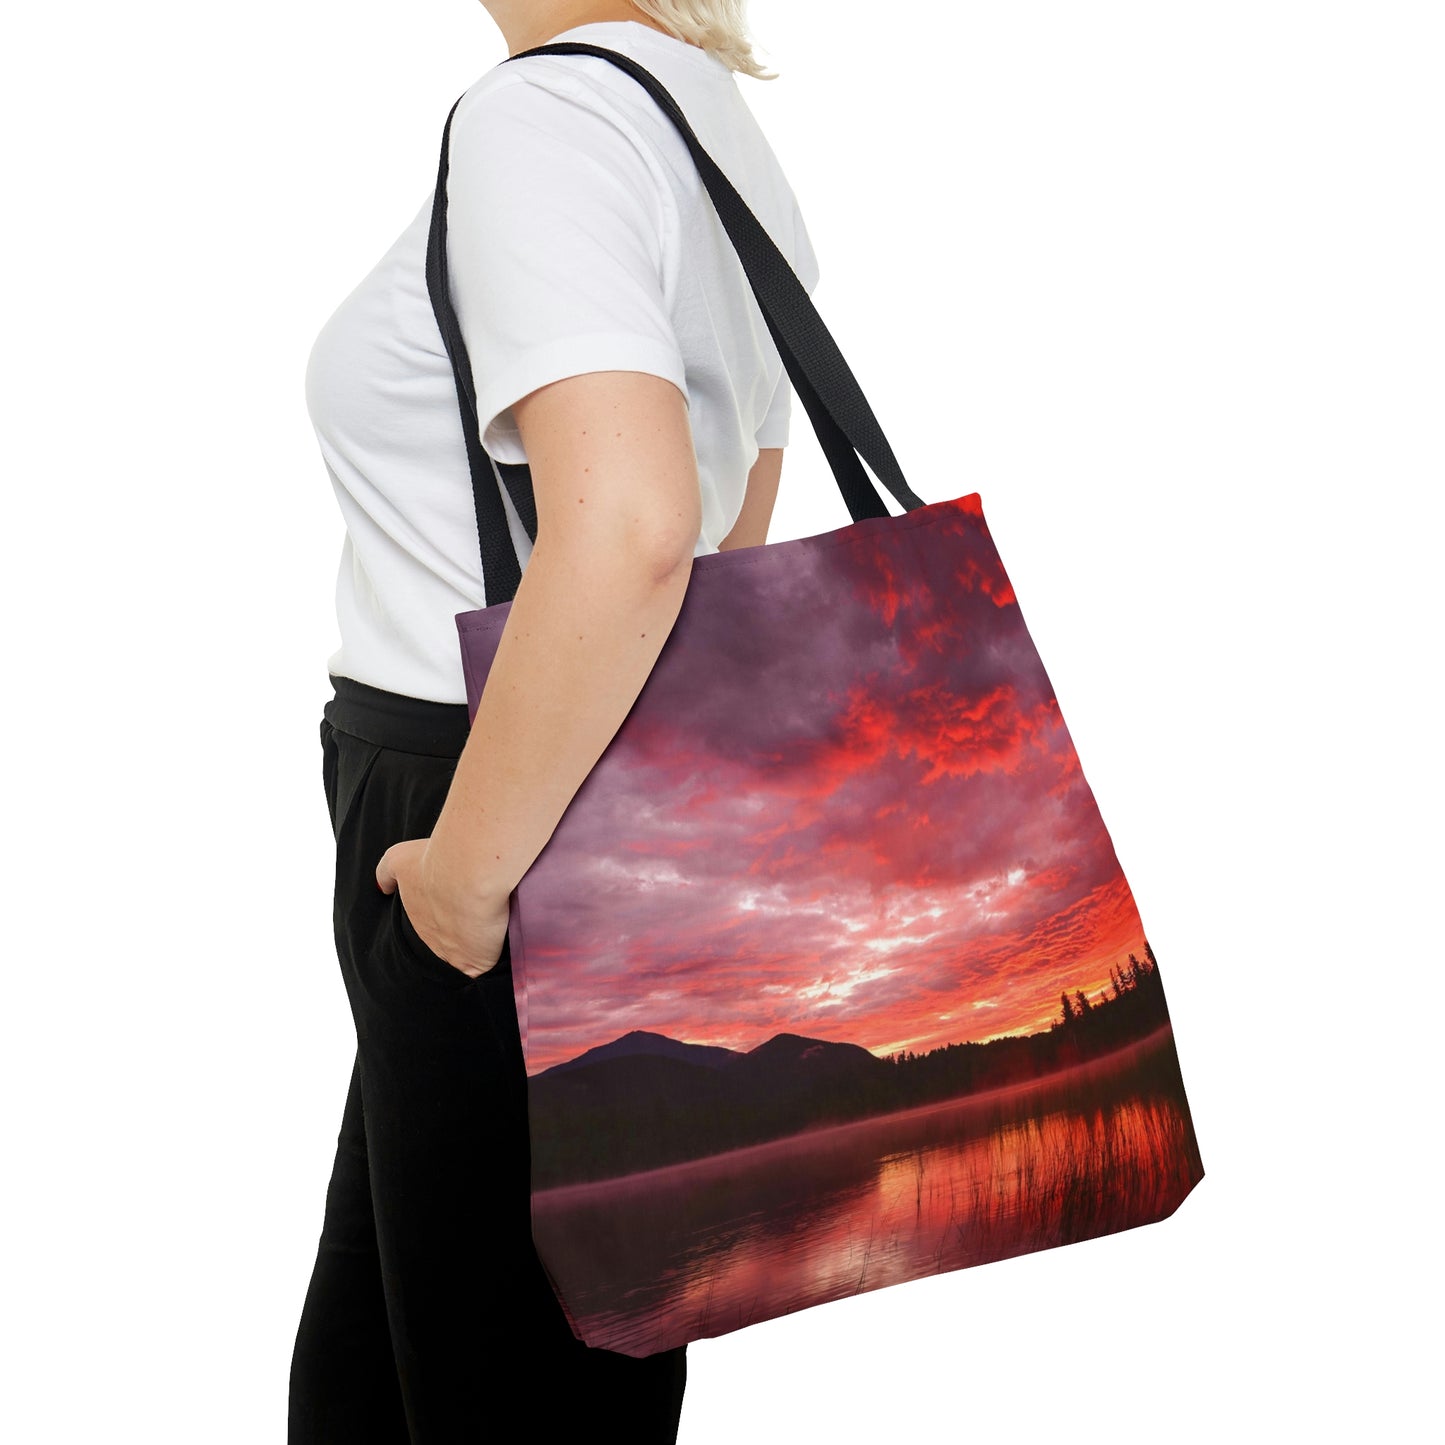 Tote Bag - Fire in the Sky, Connery Pond